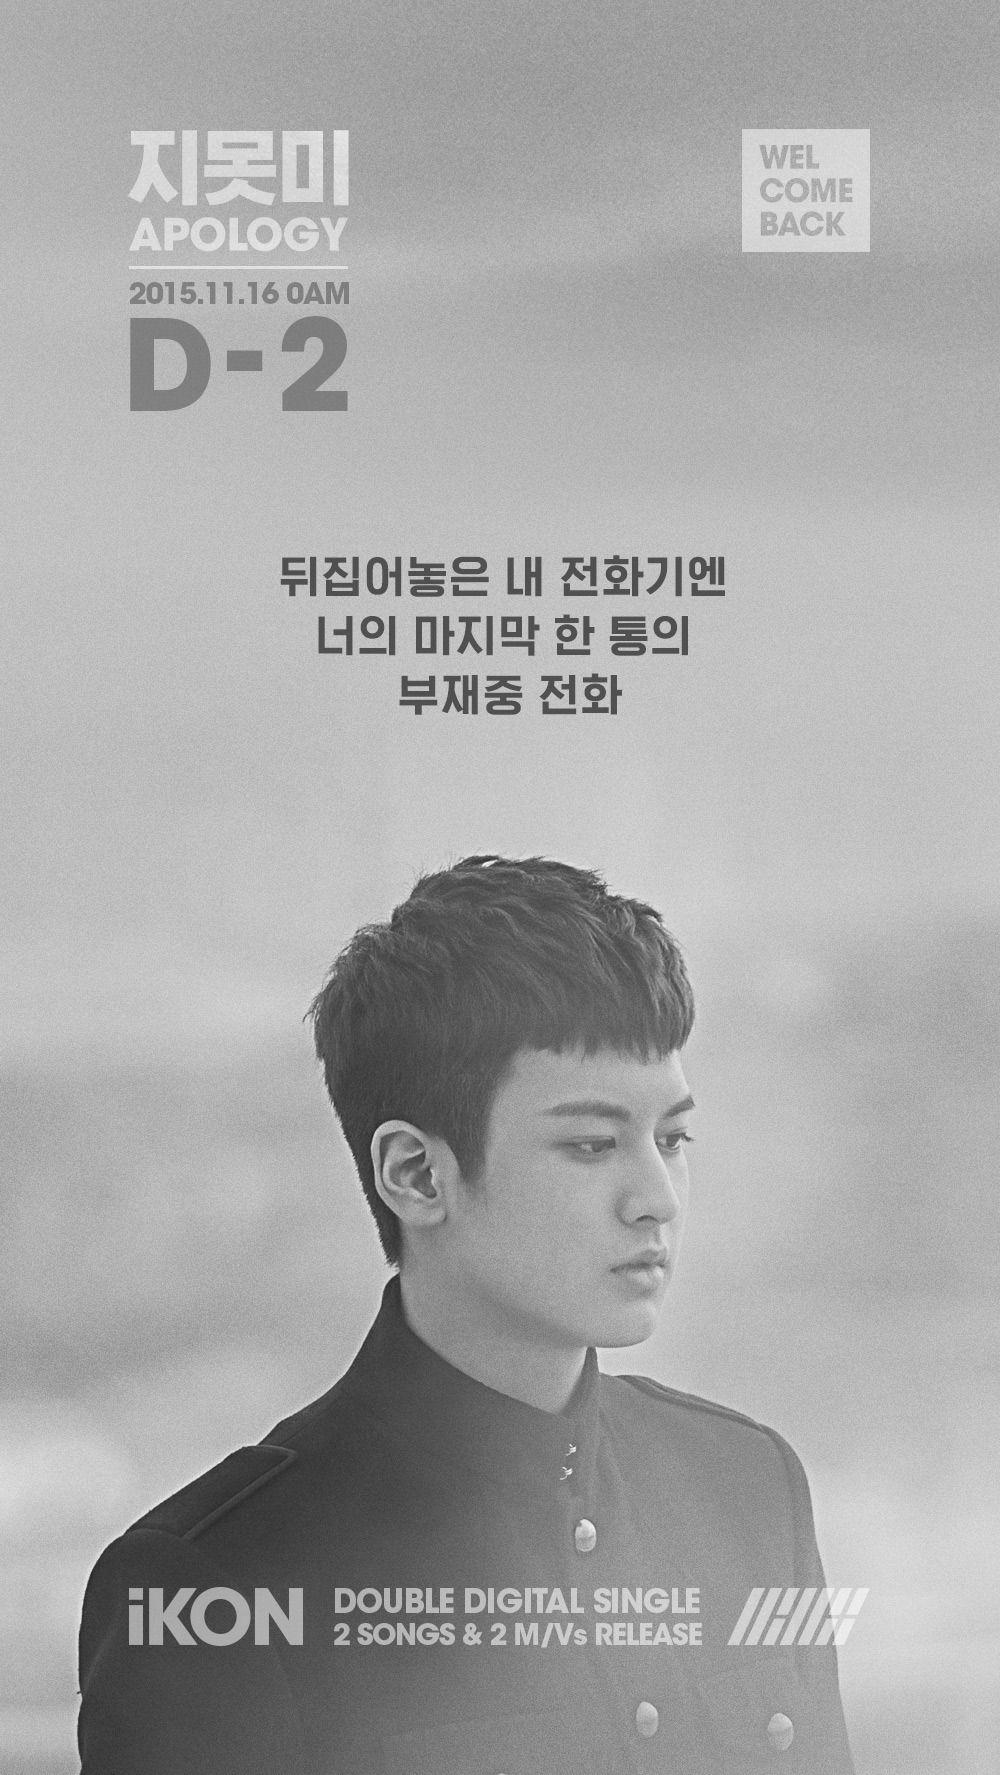 IKON Reveals D 2 Posters For “Apology” Ft. Chanwoo & Bobby